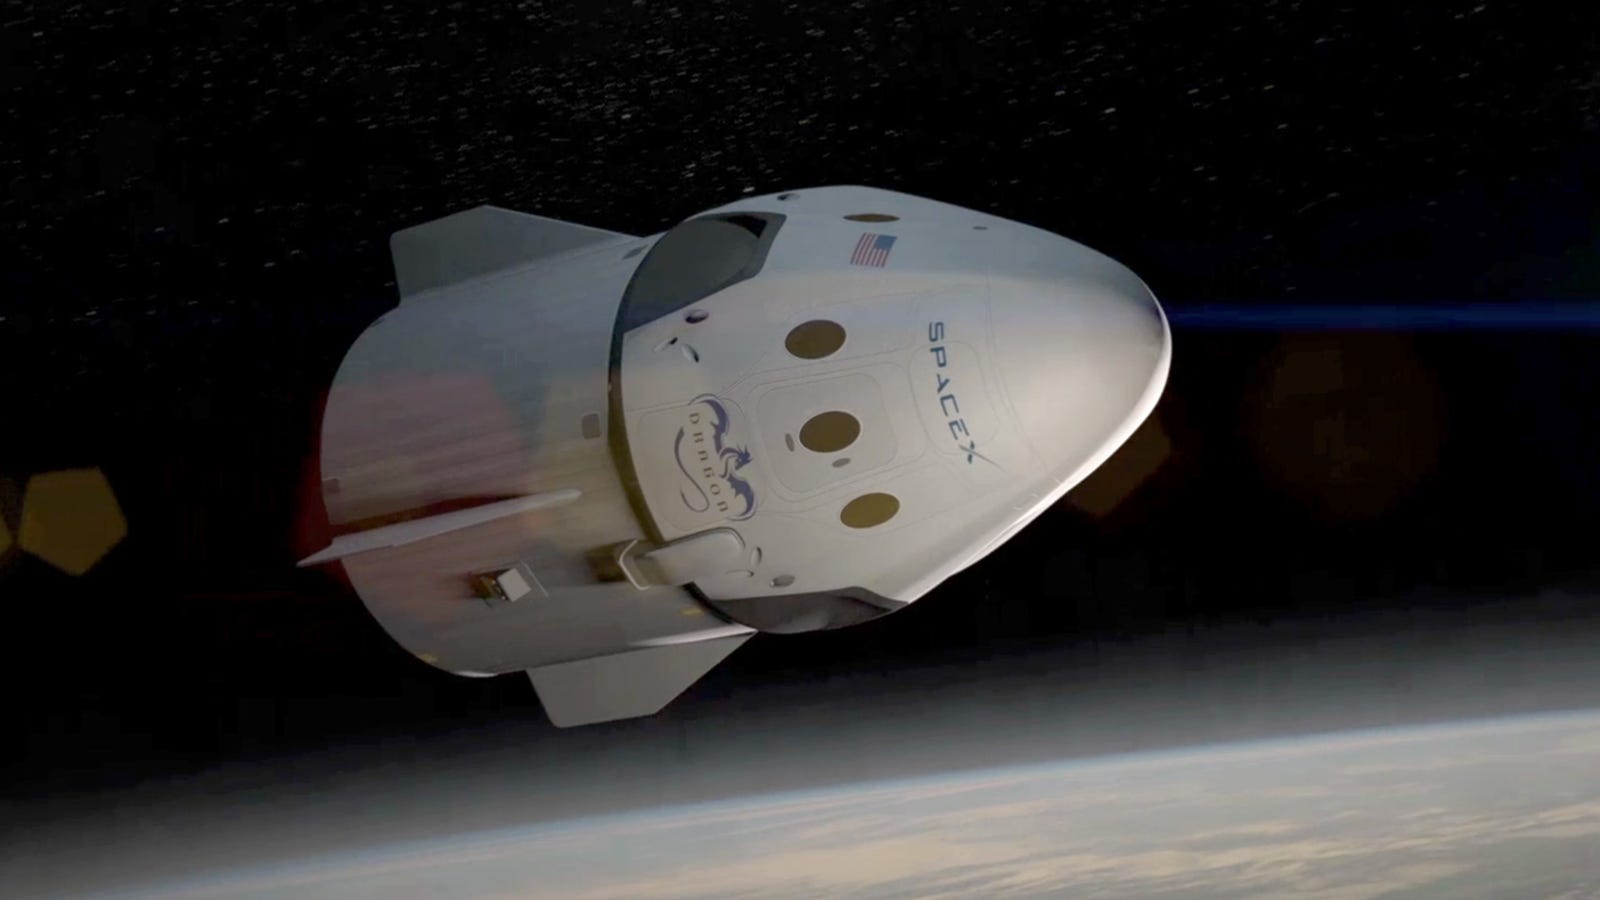 The new SpaceX Dragon V21600 x 900